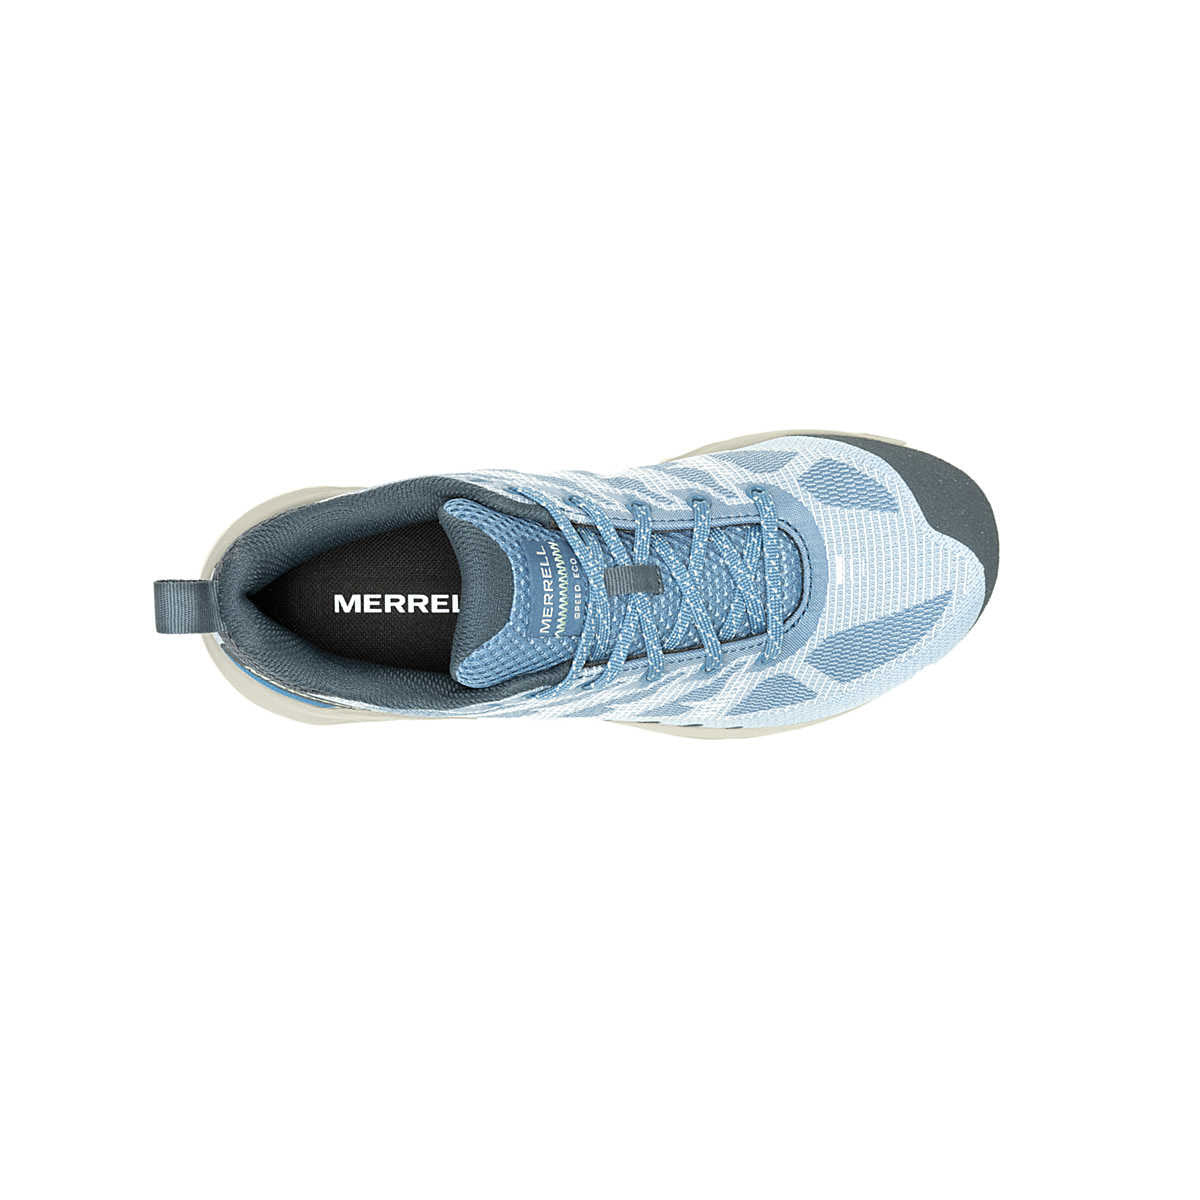 Top view of a light blue and white Merrell SPEED ECO CHAMBRAY hiking shoe with a recycled rubber outsole on a white background.